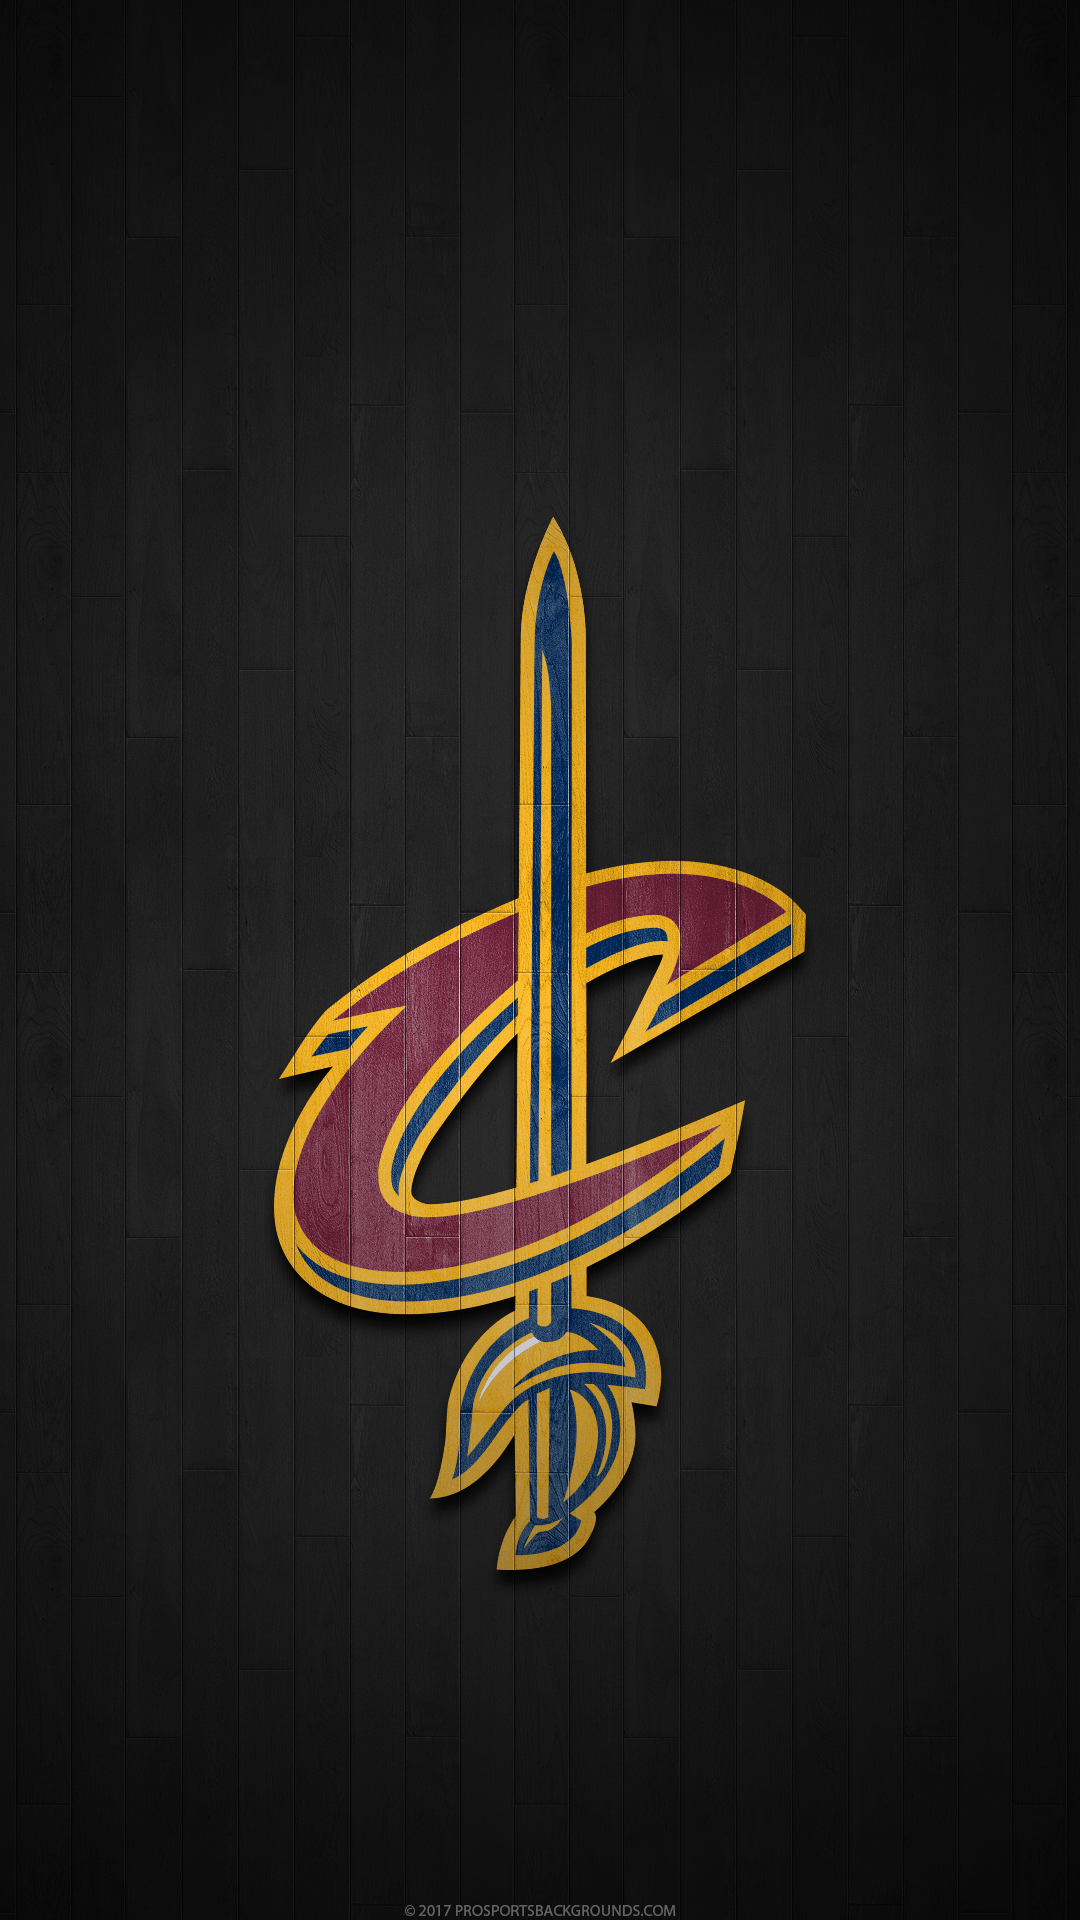 Cleveland Cavaliers Wallpaper High Resolution HD Pics Of Laptop Cavs